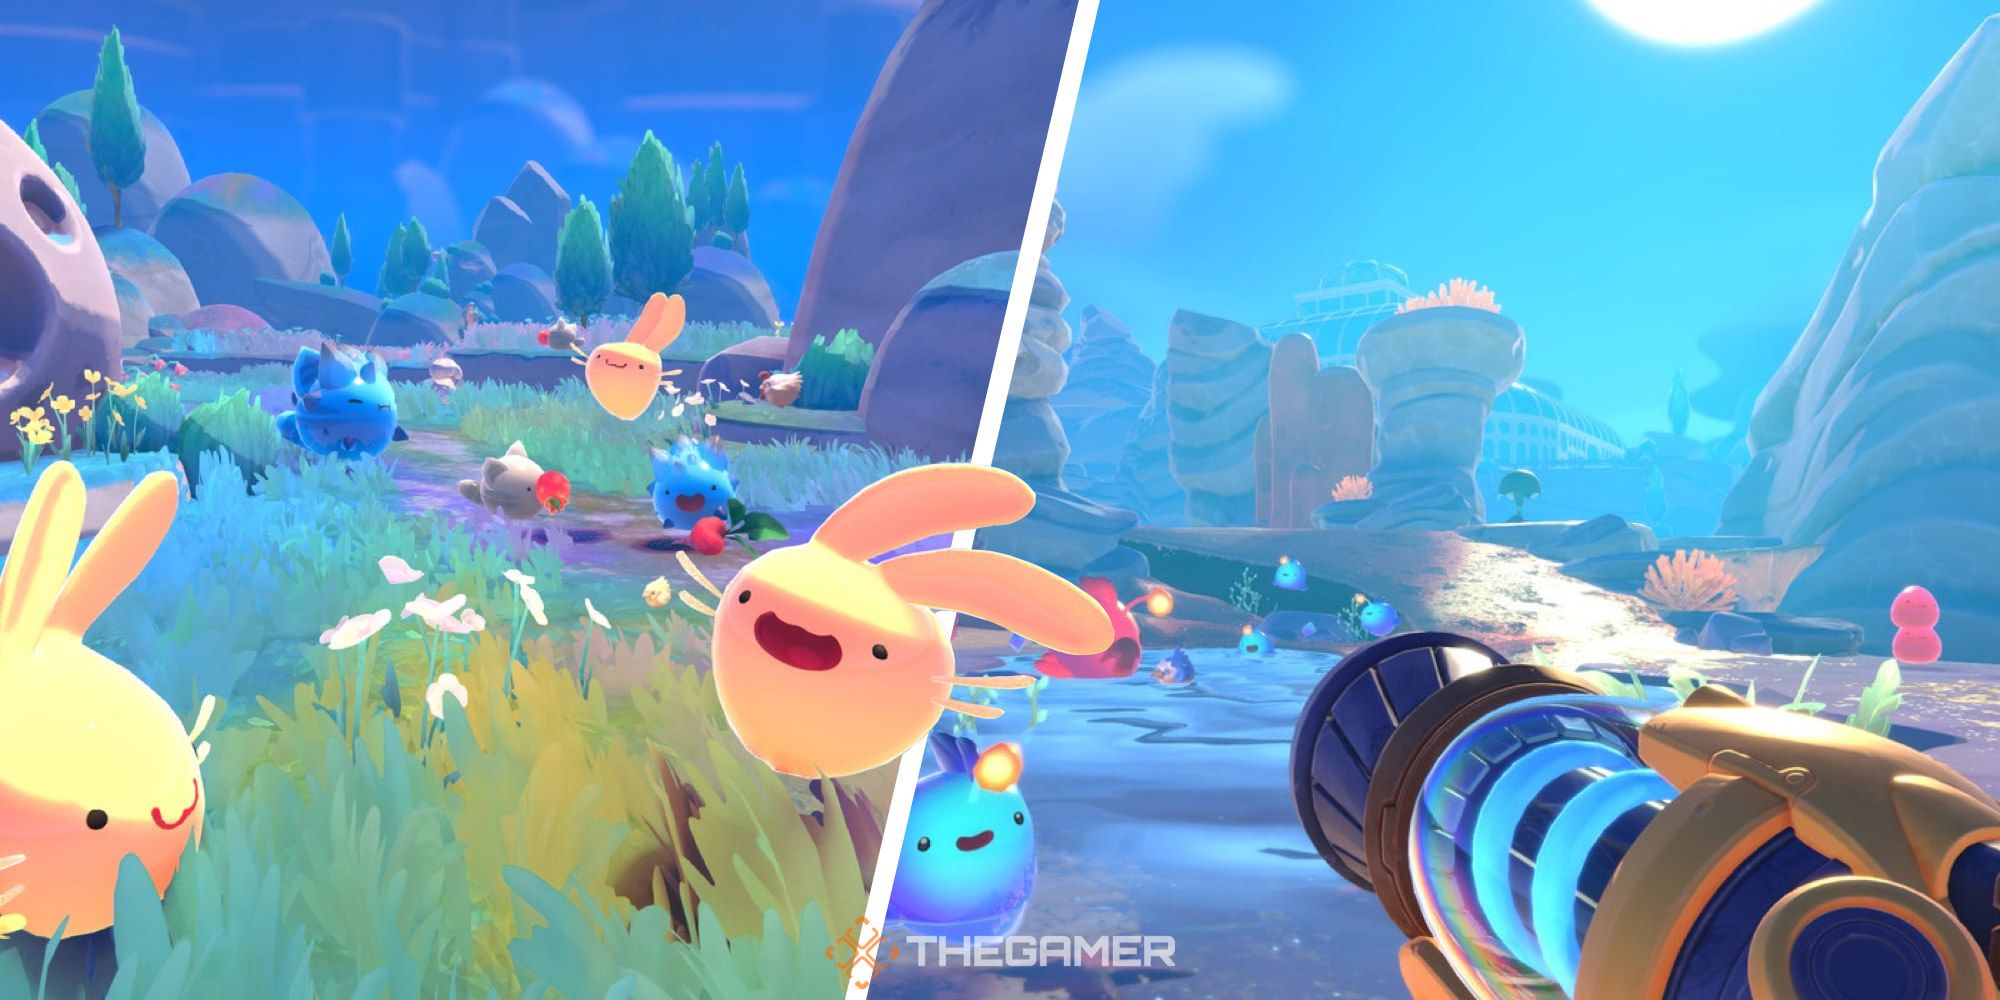 slime rancher 2 new slimes download free